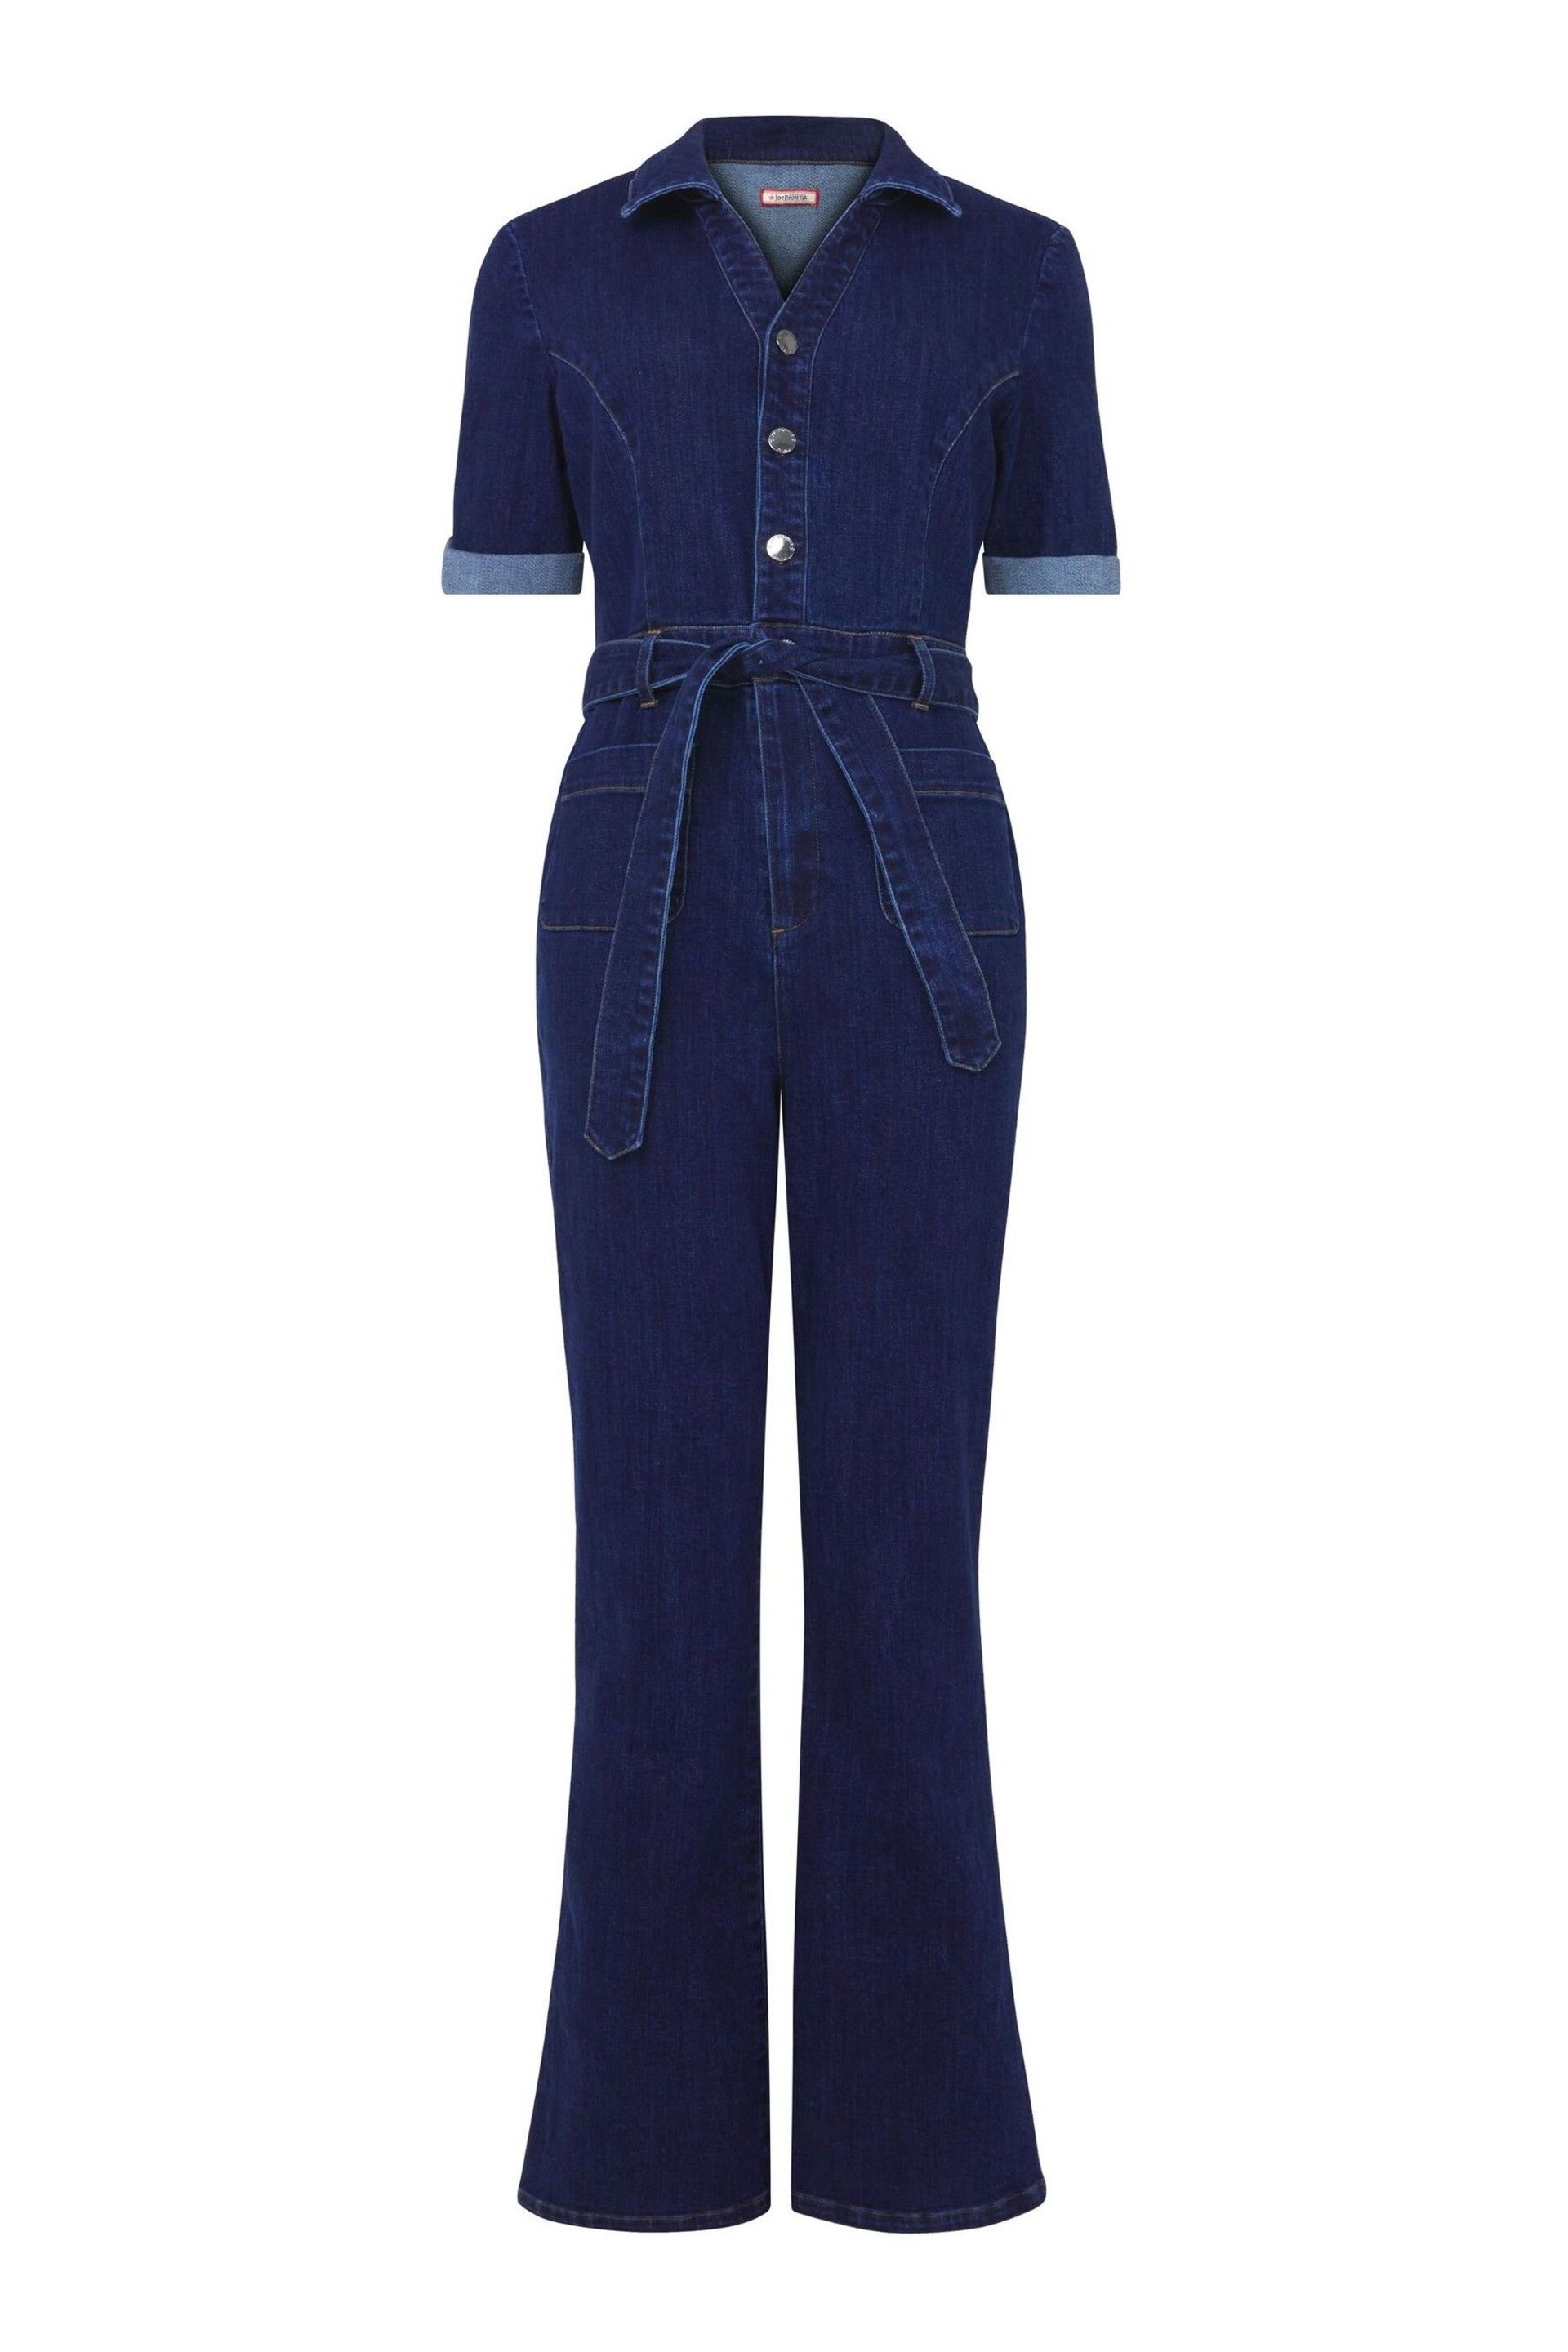 Joe Browns Blue Petite Abstract Butterfly Wide Leg Jumpsuit - Image 4 of 4